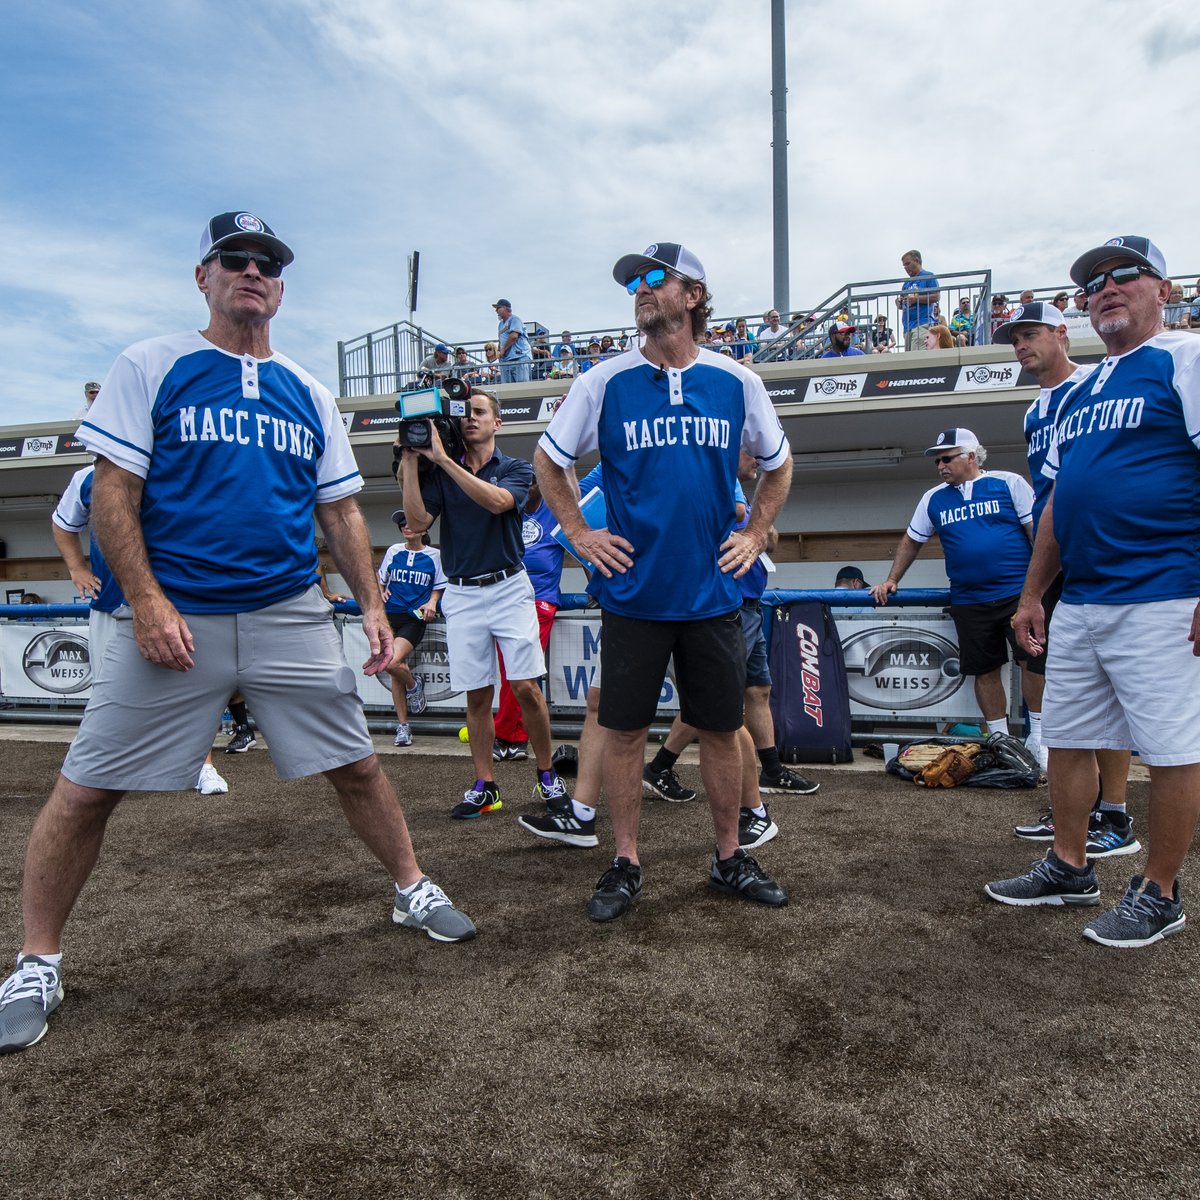 Charity softball game with Yount, Molitor, Gantner raises $102,000 for MACC  Fund: Slideshow - Milwaukee Business Journal